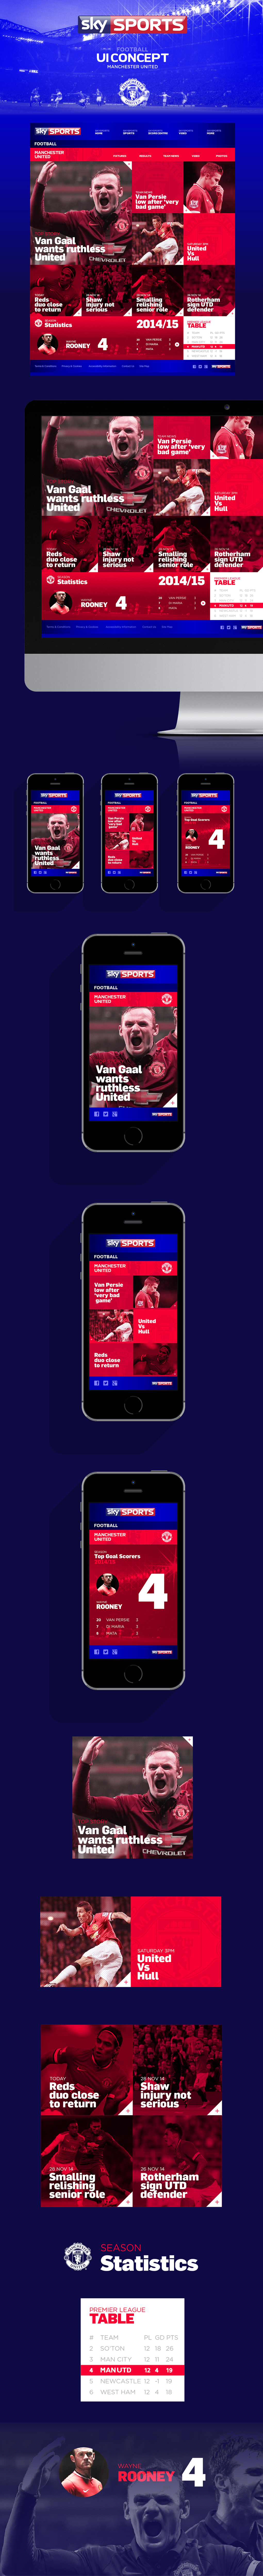 Web sports football SKY skysports UI ux grid clean rooney footballer Manchester United Responsive concept